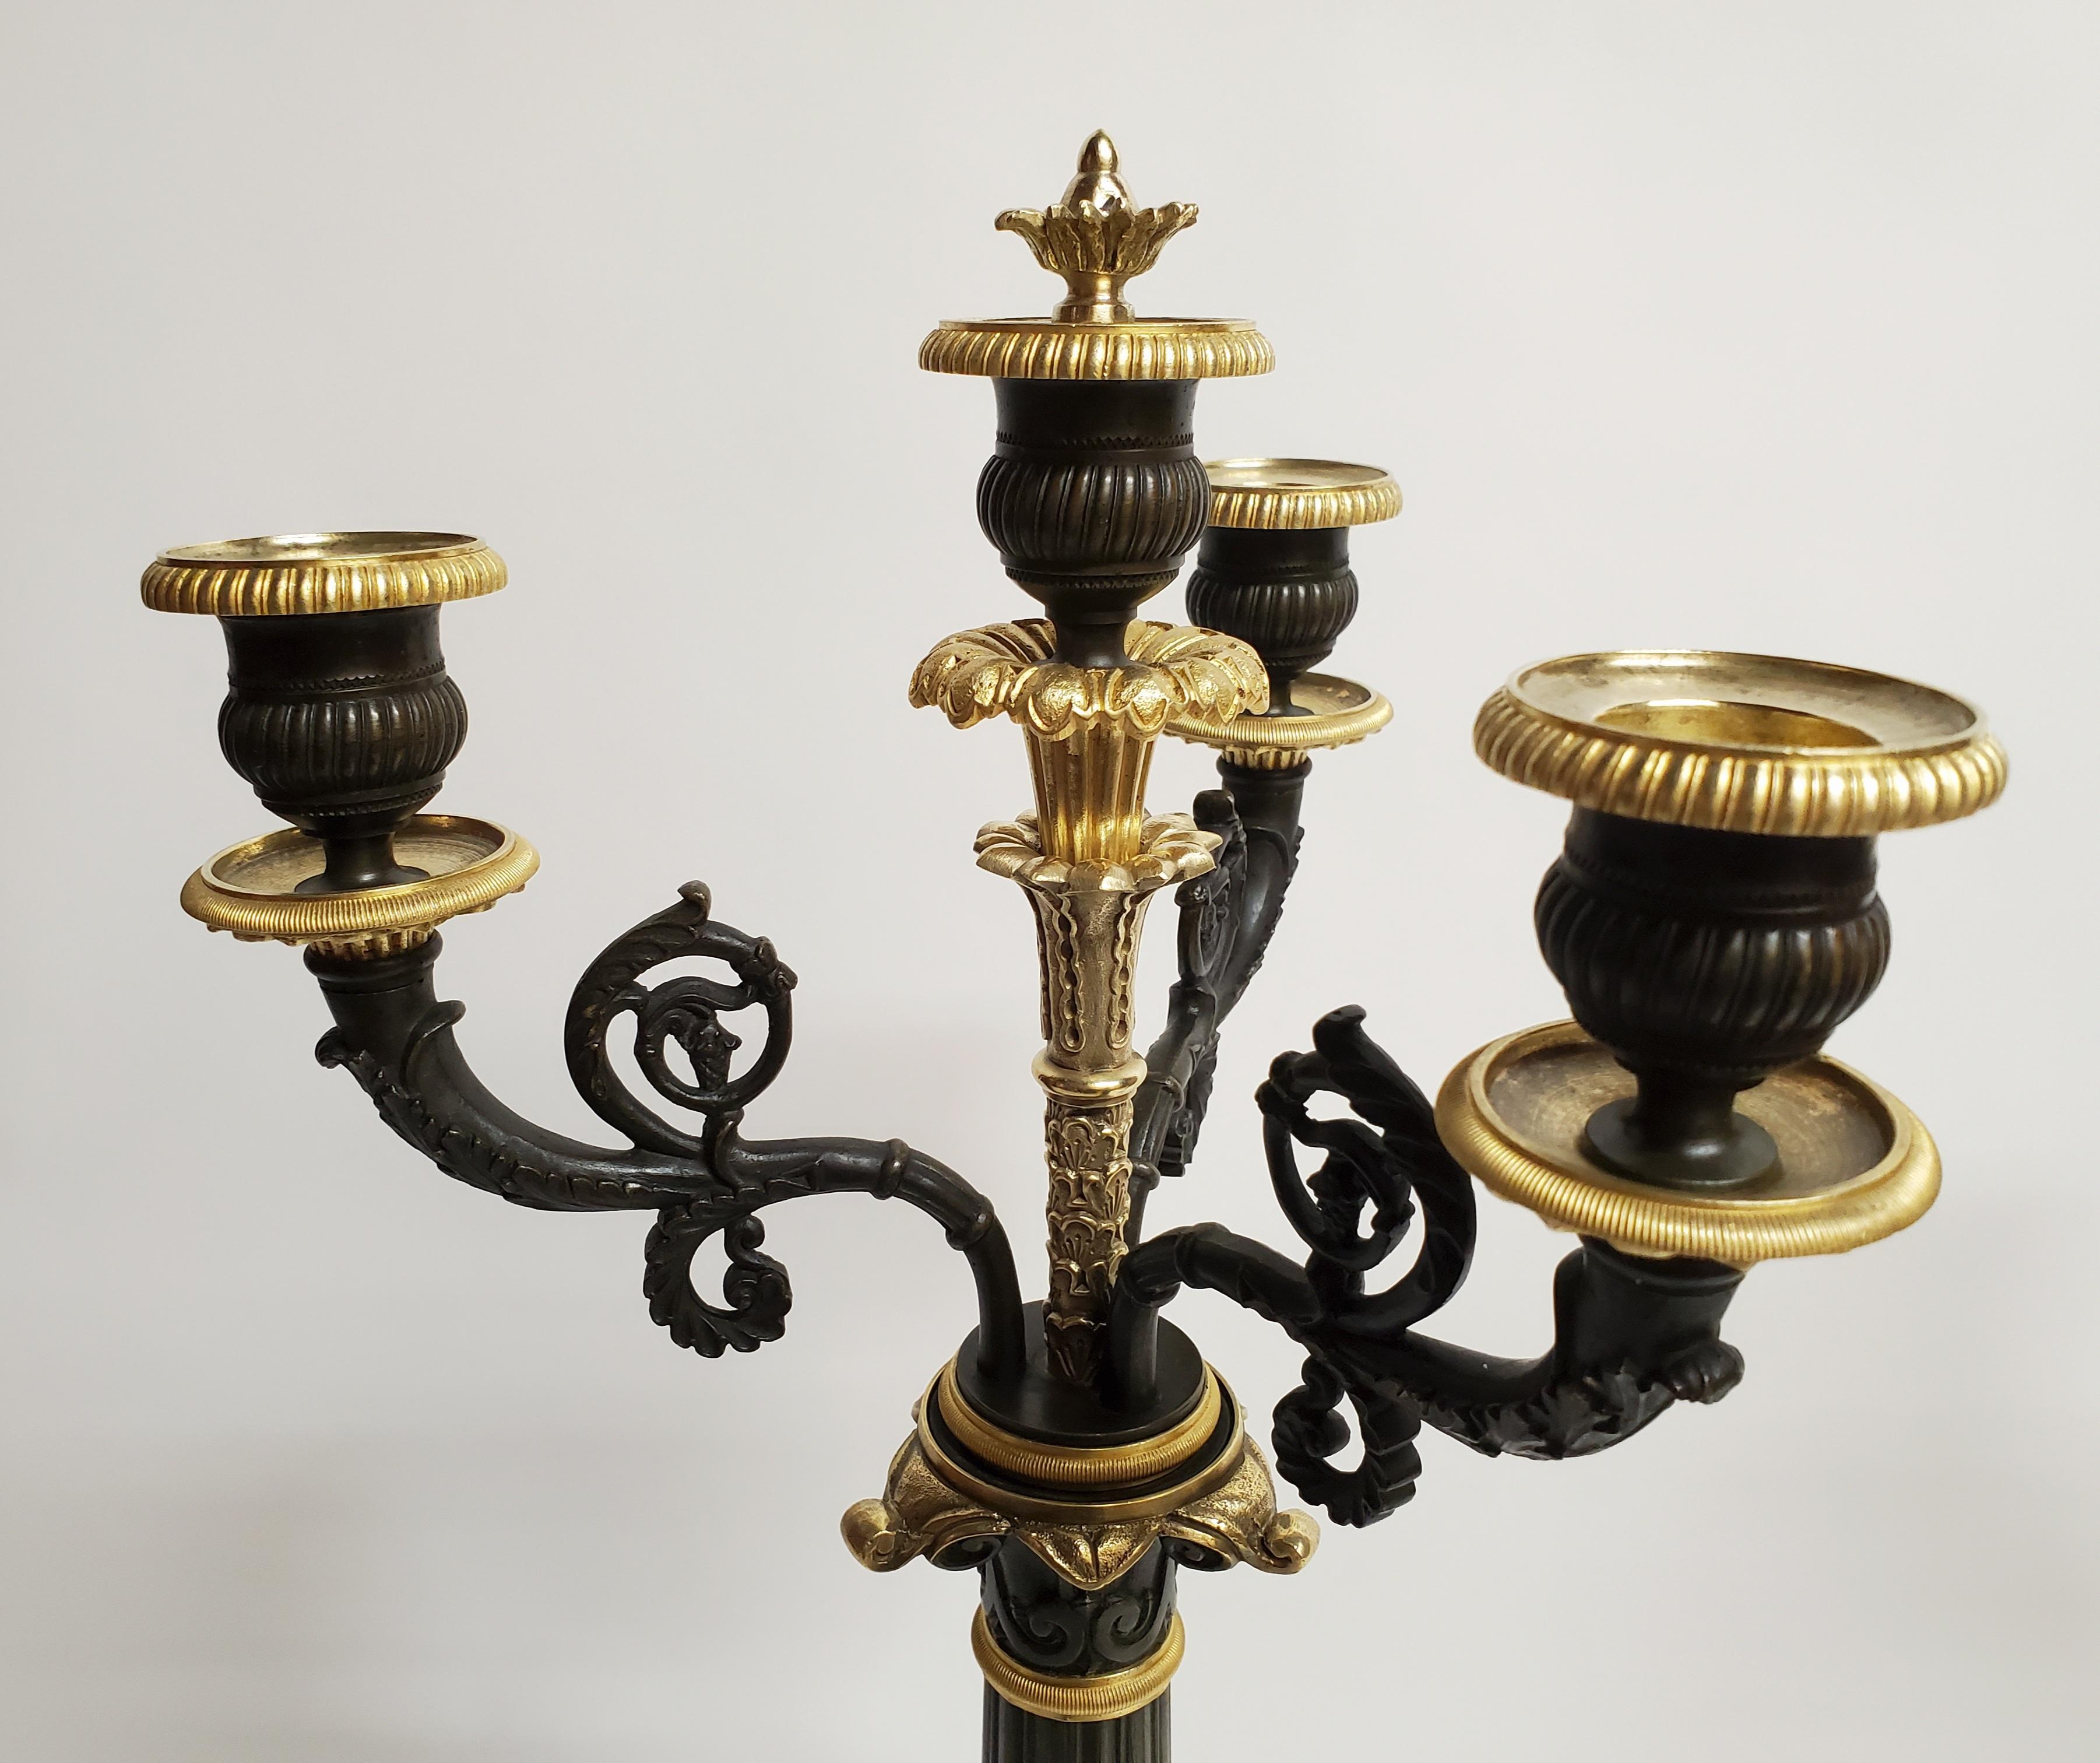 Very handsome, stylish candelabra that would work well in any home setting.